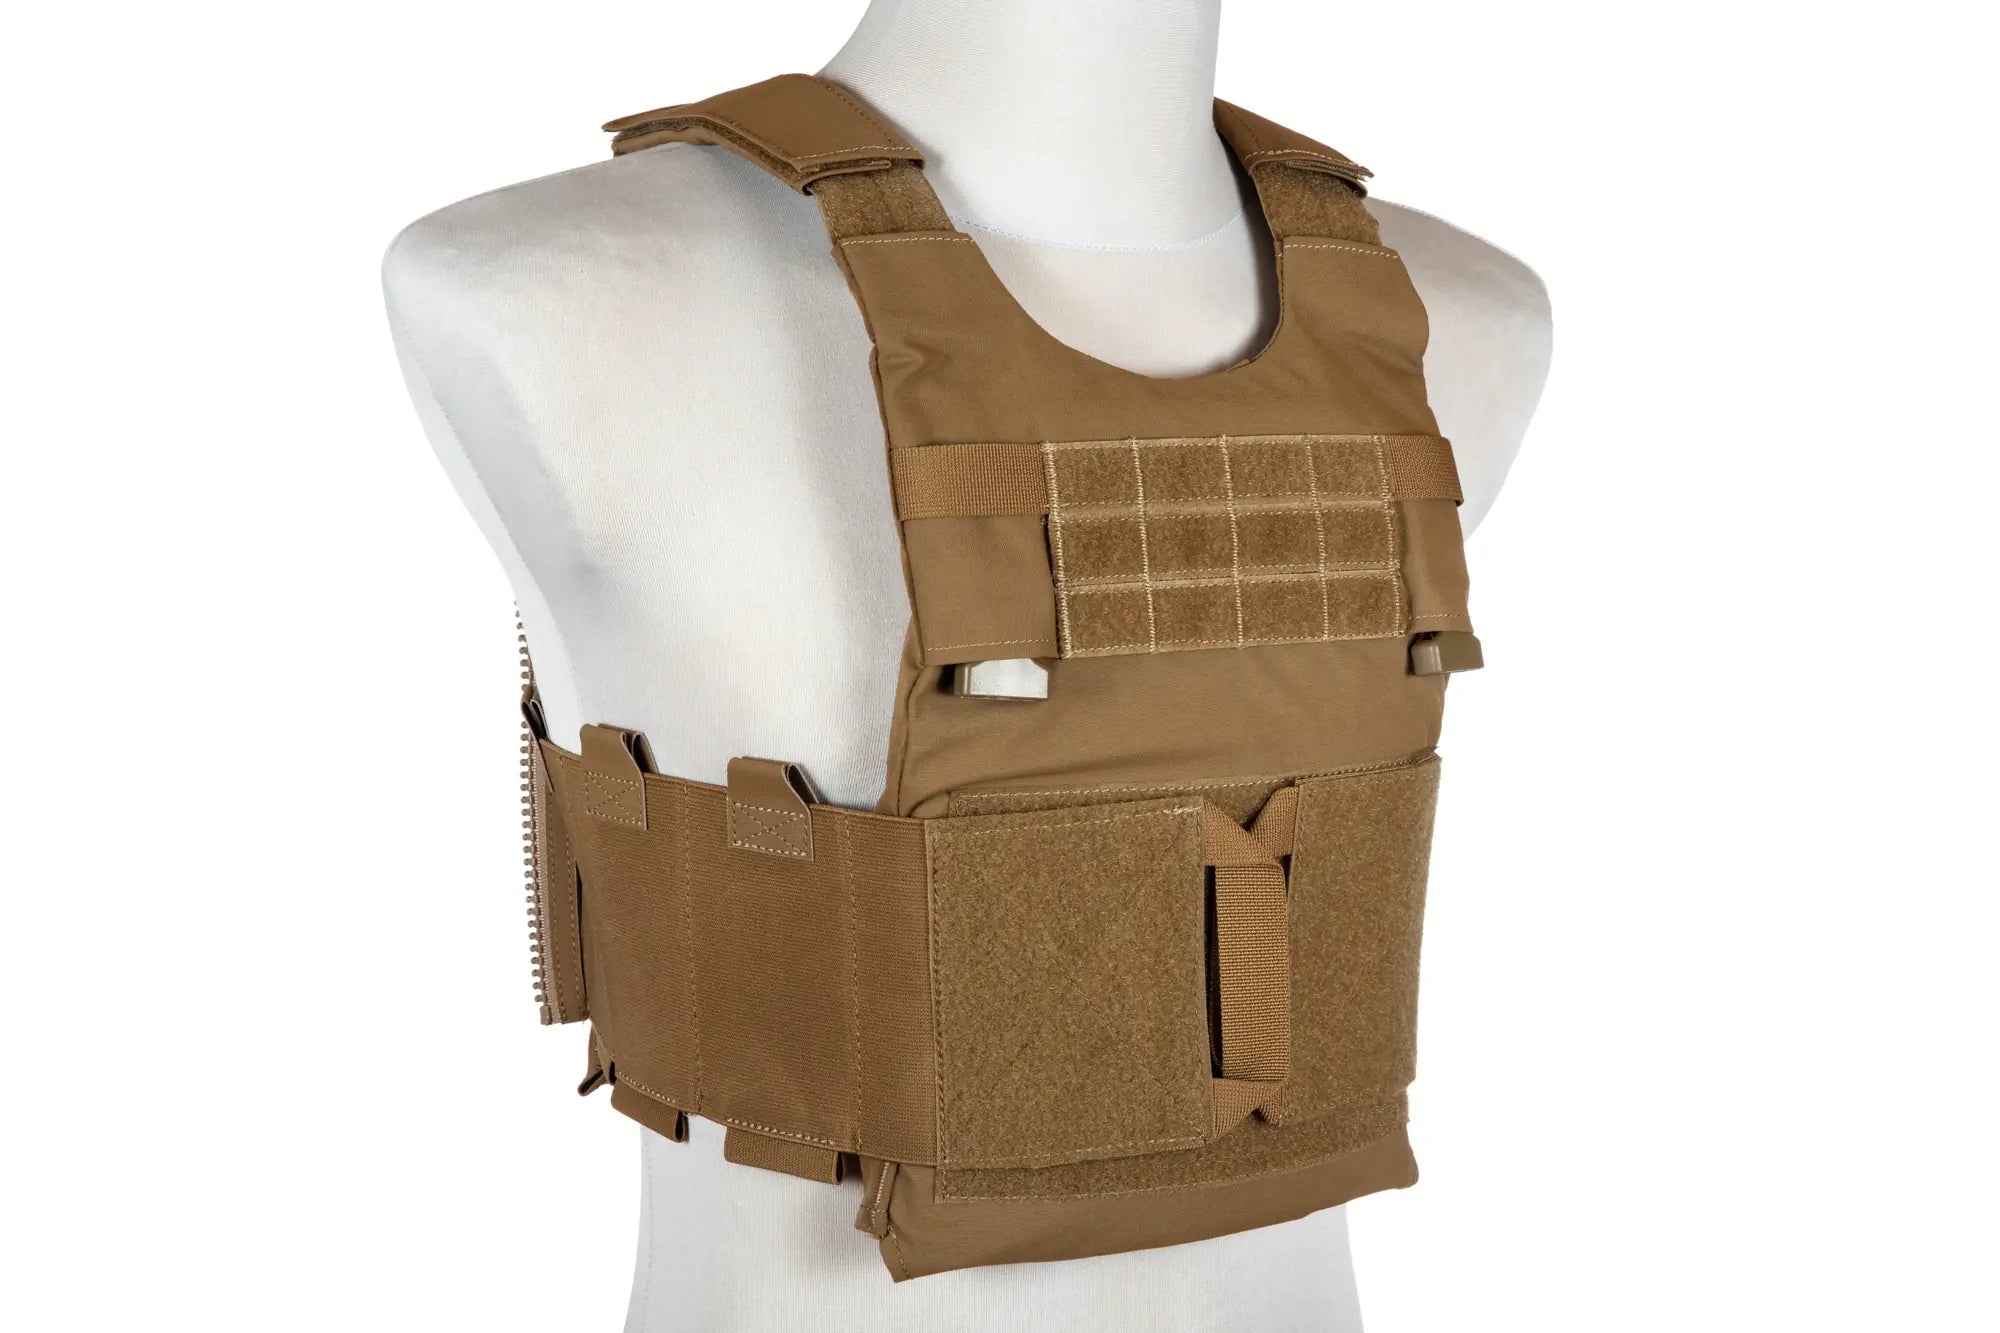 LV-119 Type Tactical Vest - Coyote Brown-2